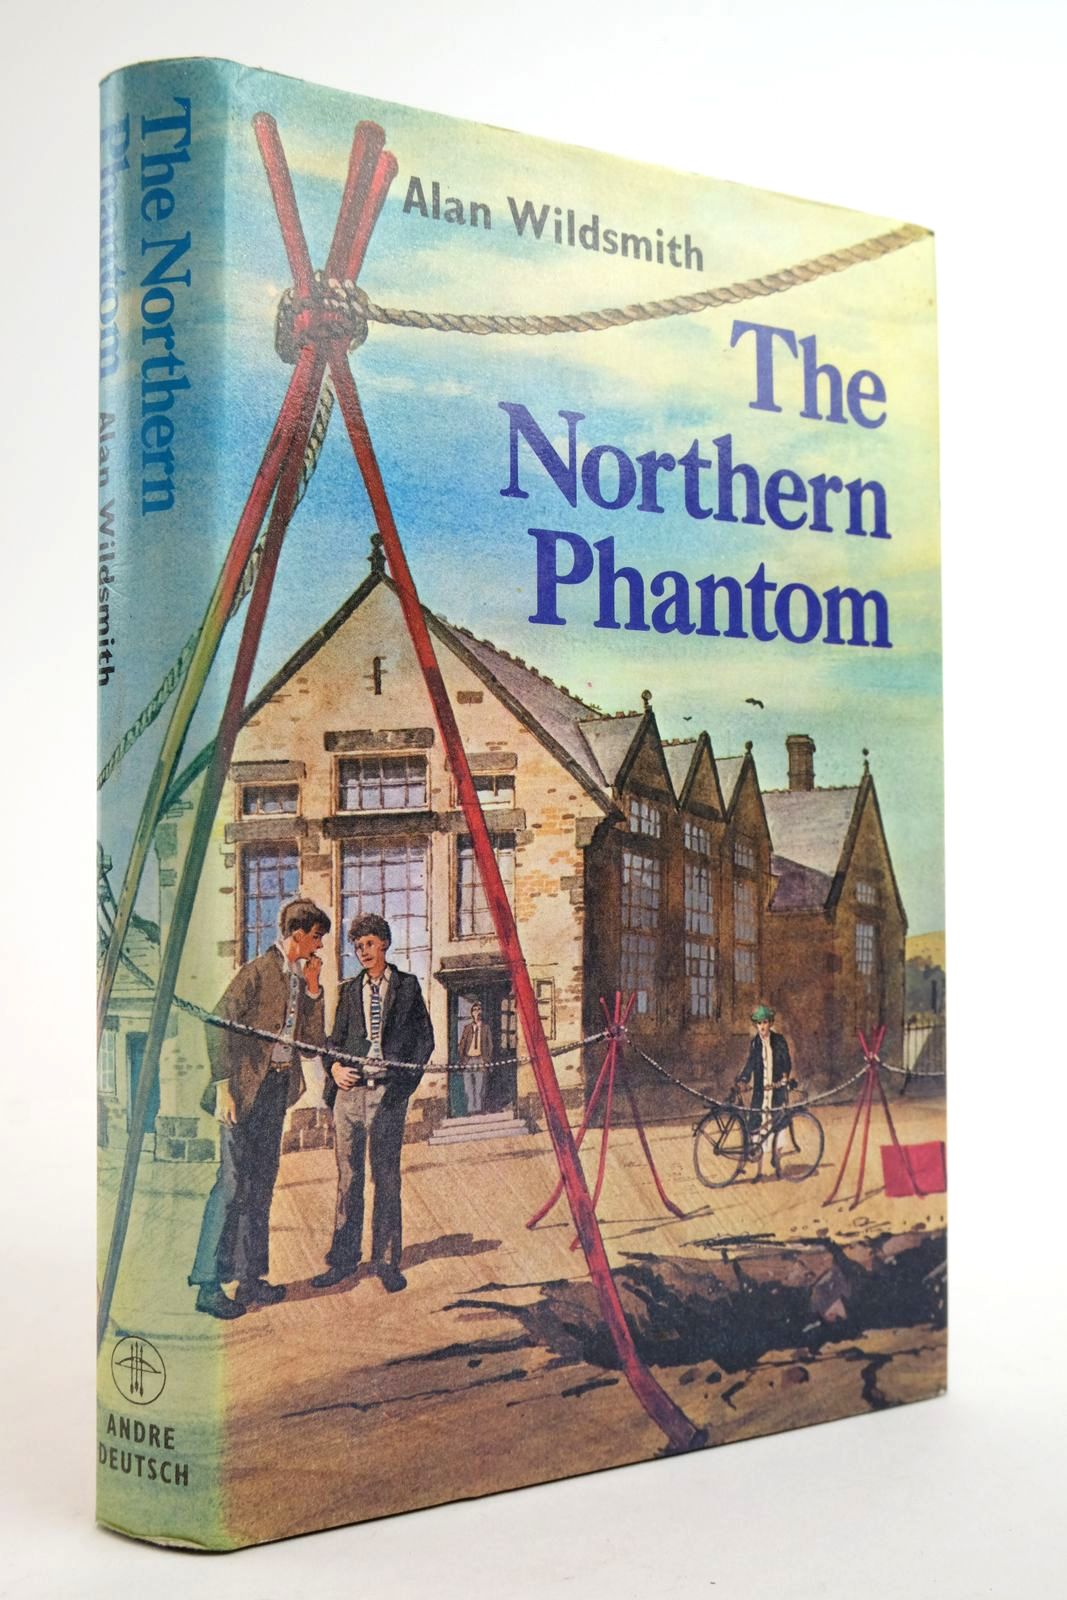 Photo of THE NORTHERN PHANTOM written by Wildsmith, Alan published by Andre Deutsch (STOCK CODE: 2135462)  for sale by Stella & Rose's Books